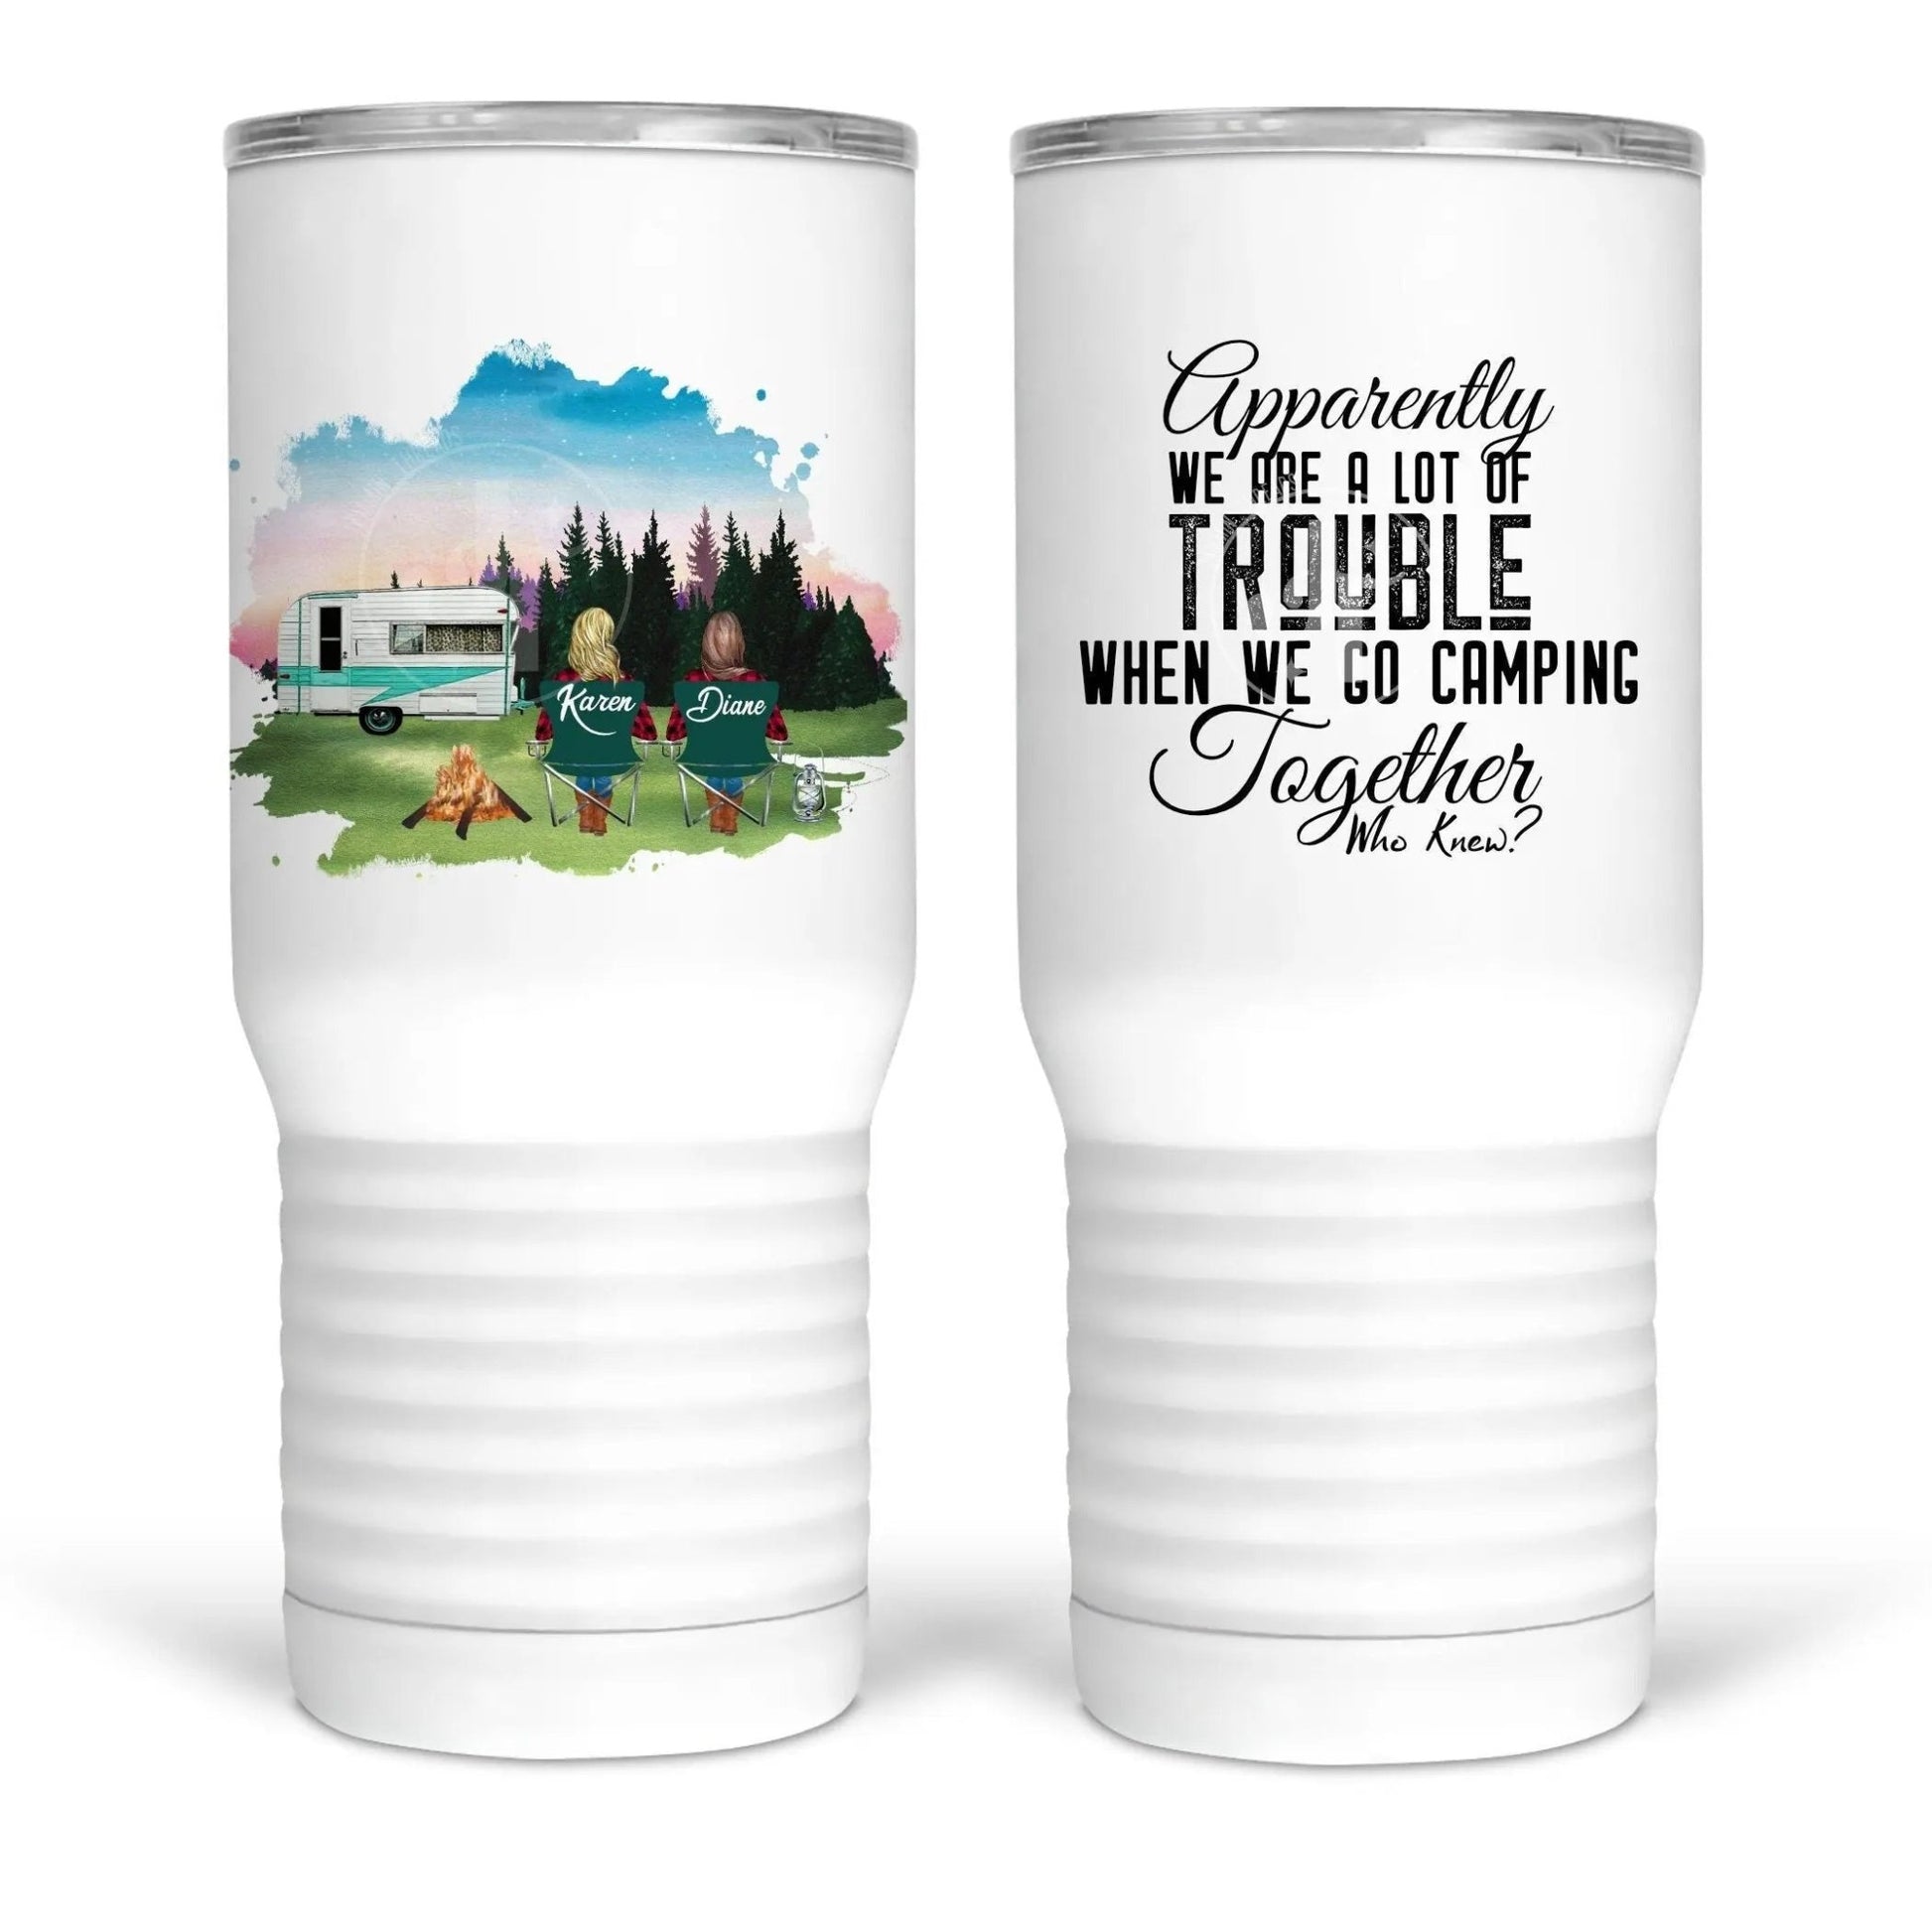 Apparently We Are A Lot Of Trouble When We Go Camping Together, Who Knew? Funny camping mugs and tumblers for your camping friends - Jammin Threads